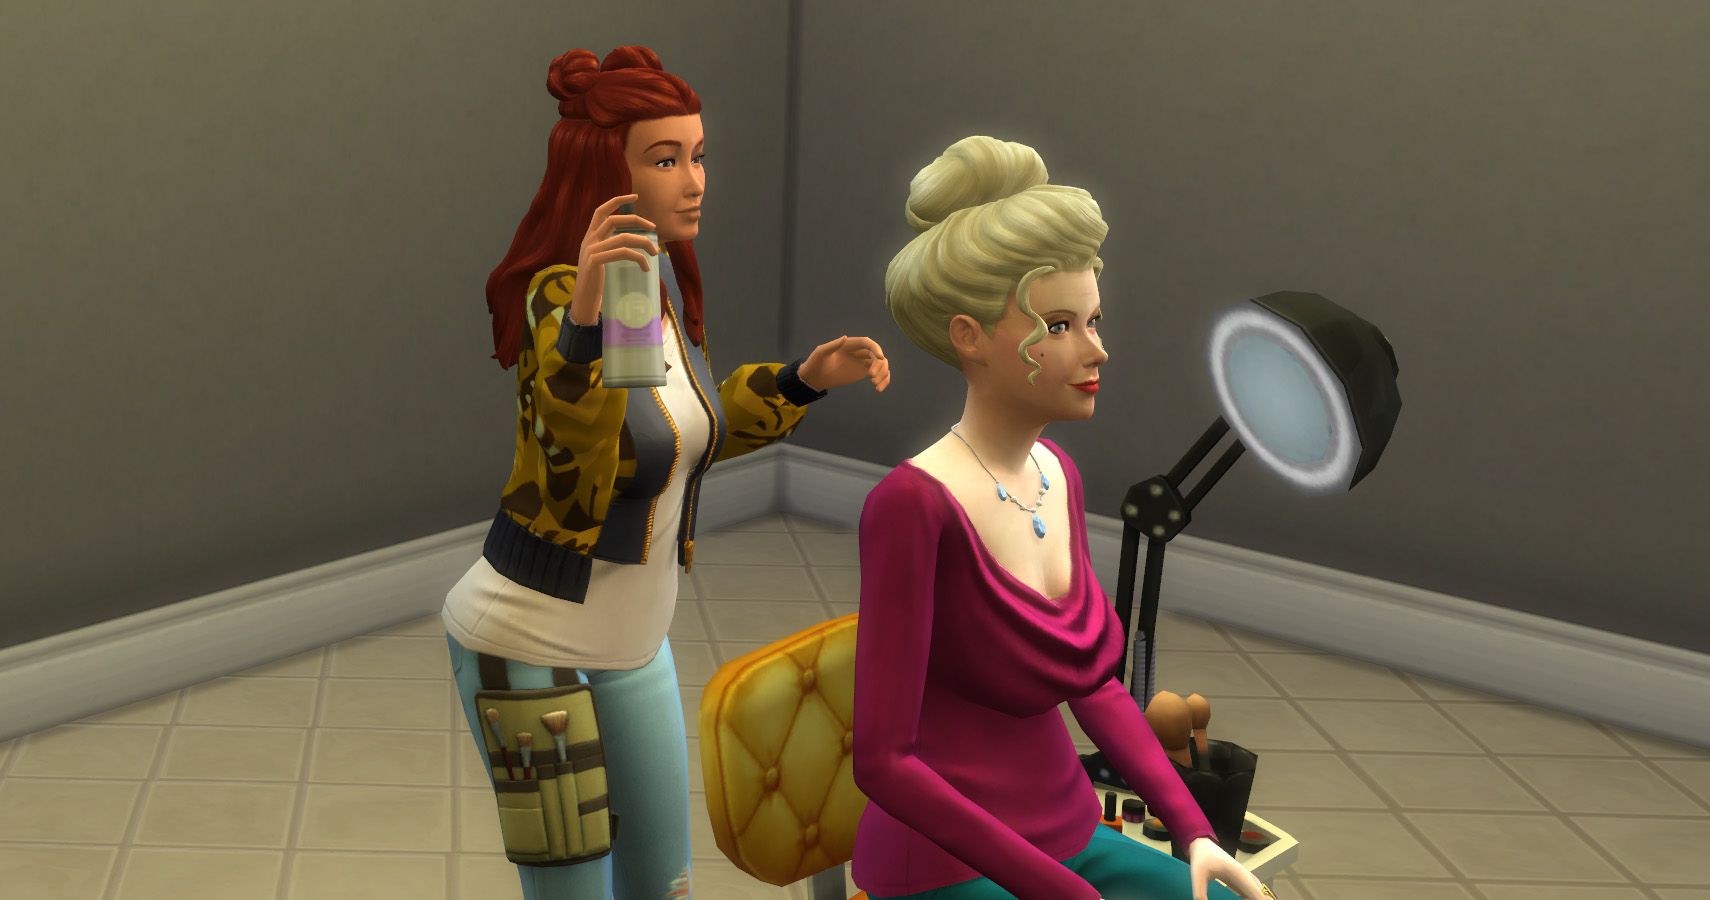 Judith ward getting makeup done in hair and makeup in the acting career in the sims 4 get famous